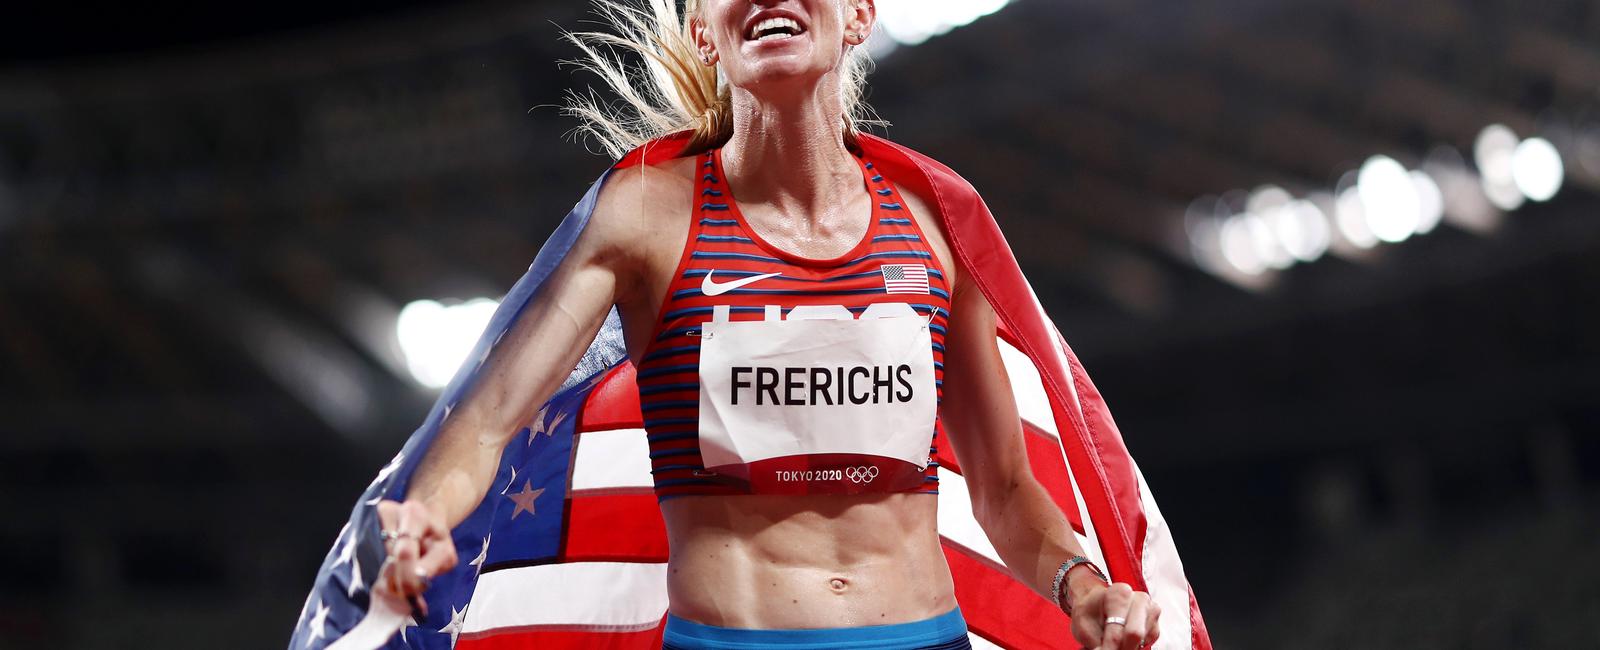 No olympic steeplechase silver medalist male or female has lived past the age of 41